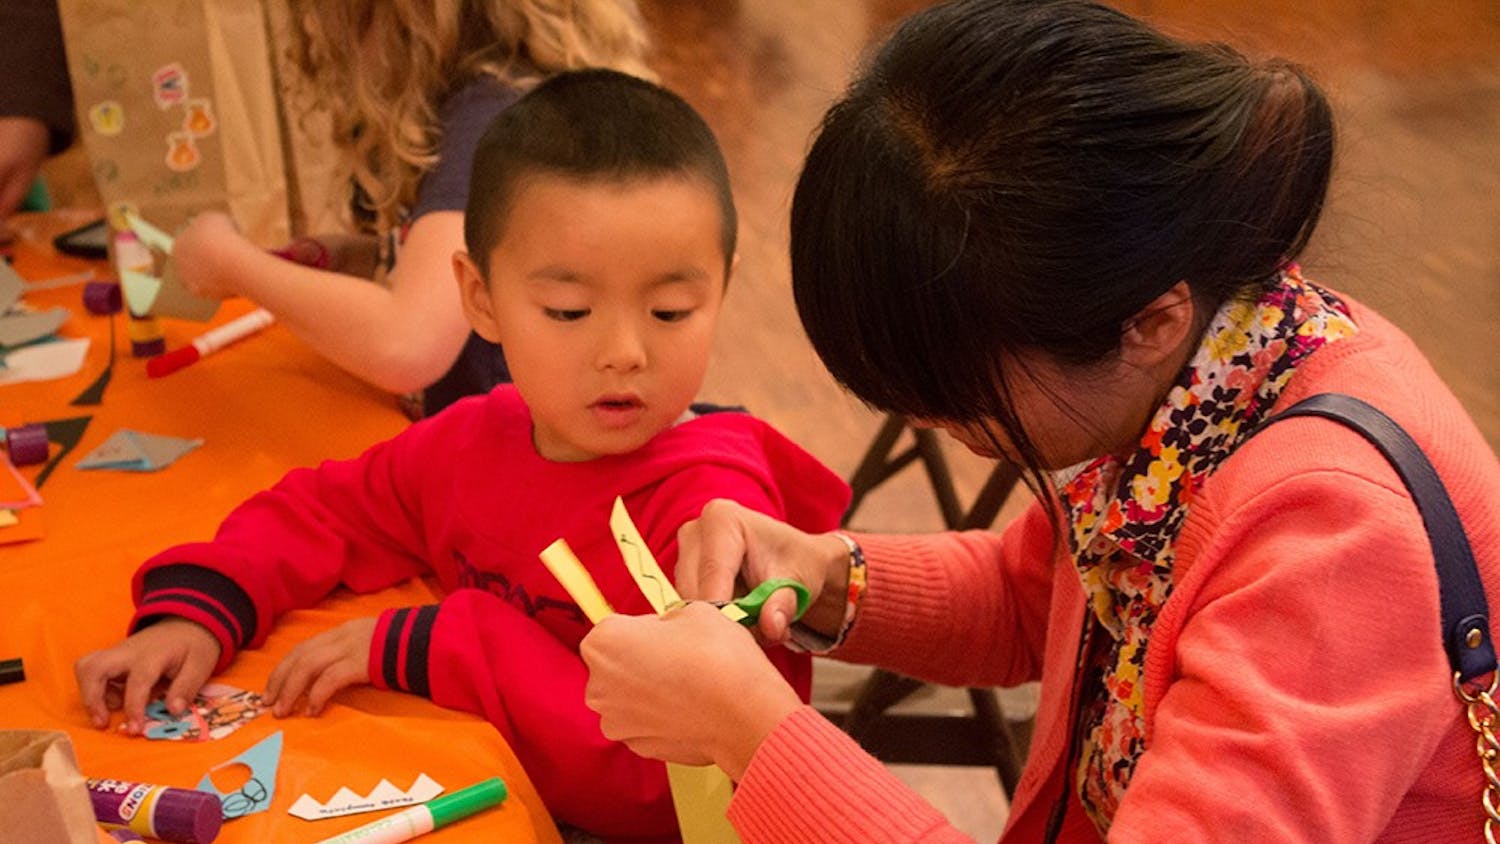 Luming Xu helps her son Yoyo cut out teeth for a monster bookmark at the Mathers Museum's Halloween Family Fun Fest on Oct. 26.